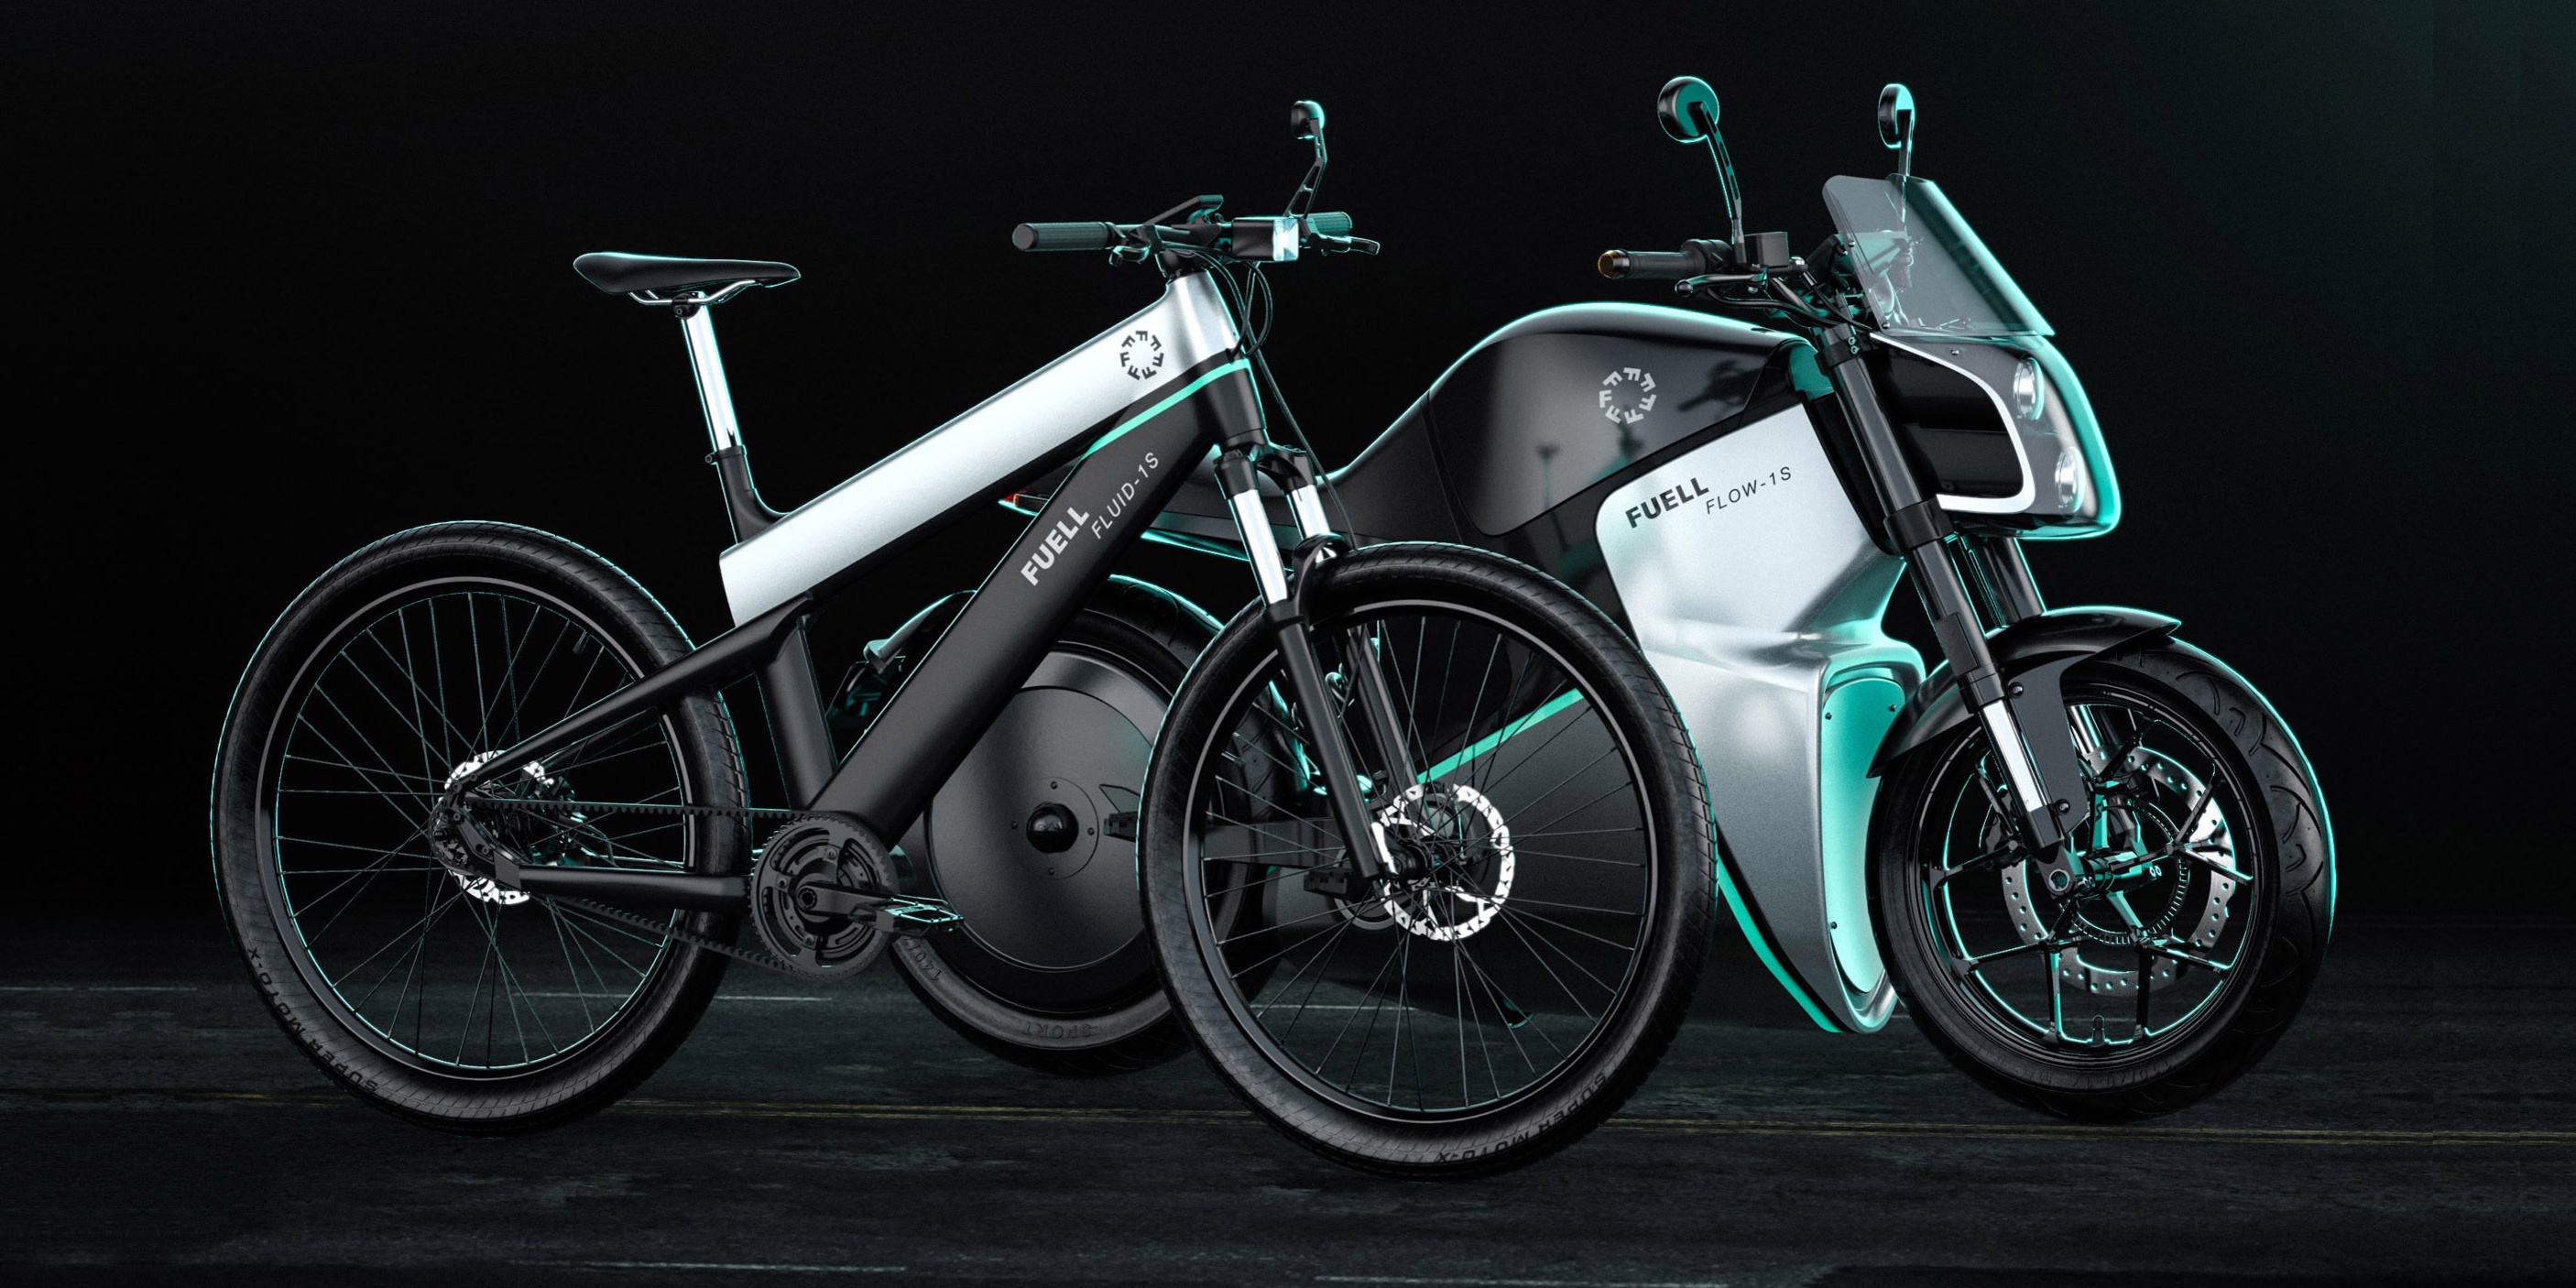 Motorcycle Visionary Erik Buell S New Fuell Fluid Electric Bicycle With 200 Km Range Begins Sales Electrek